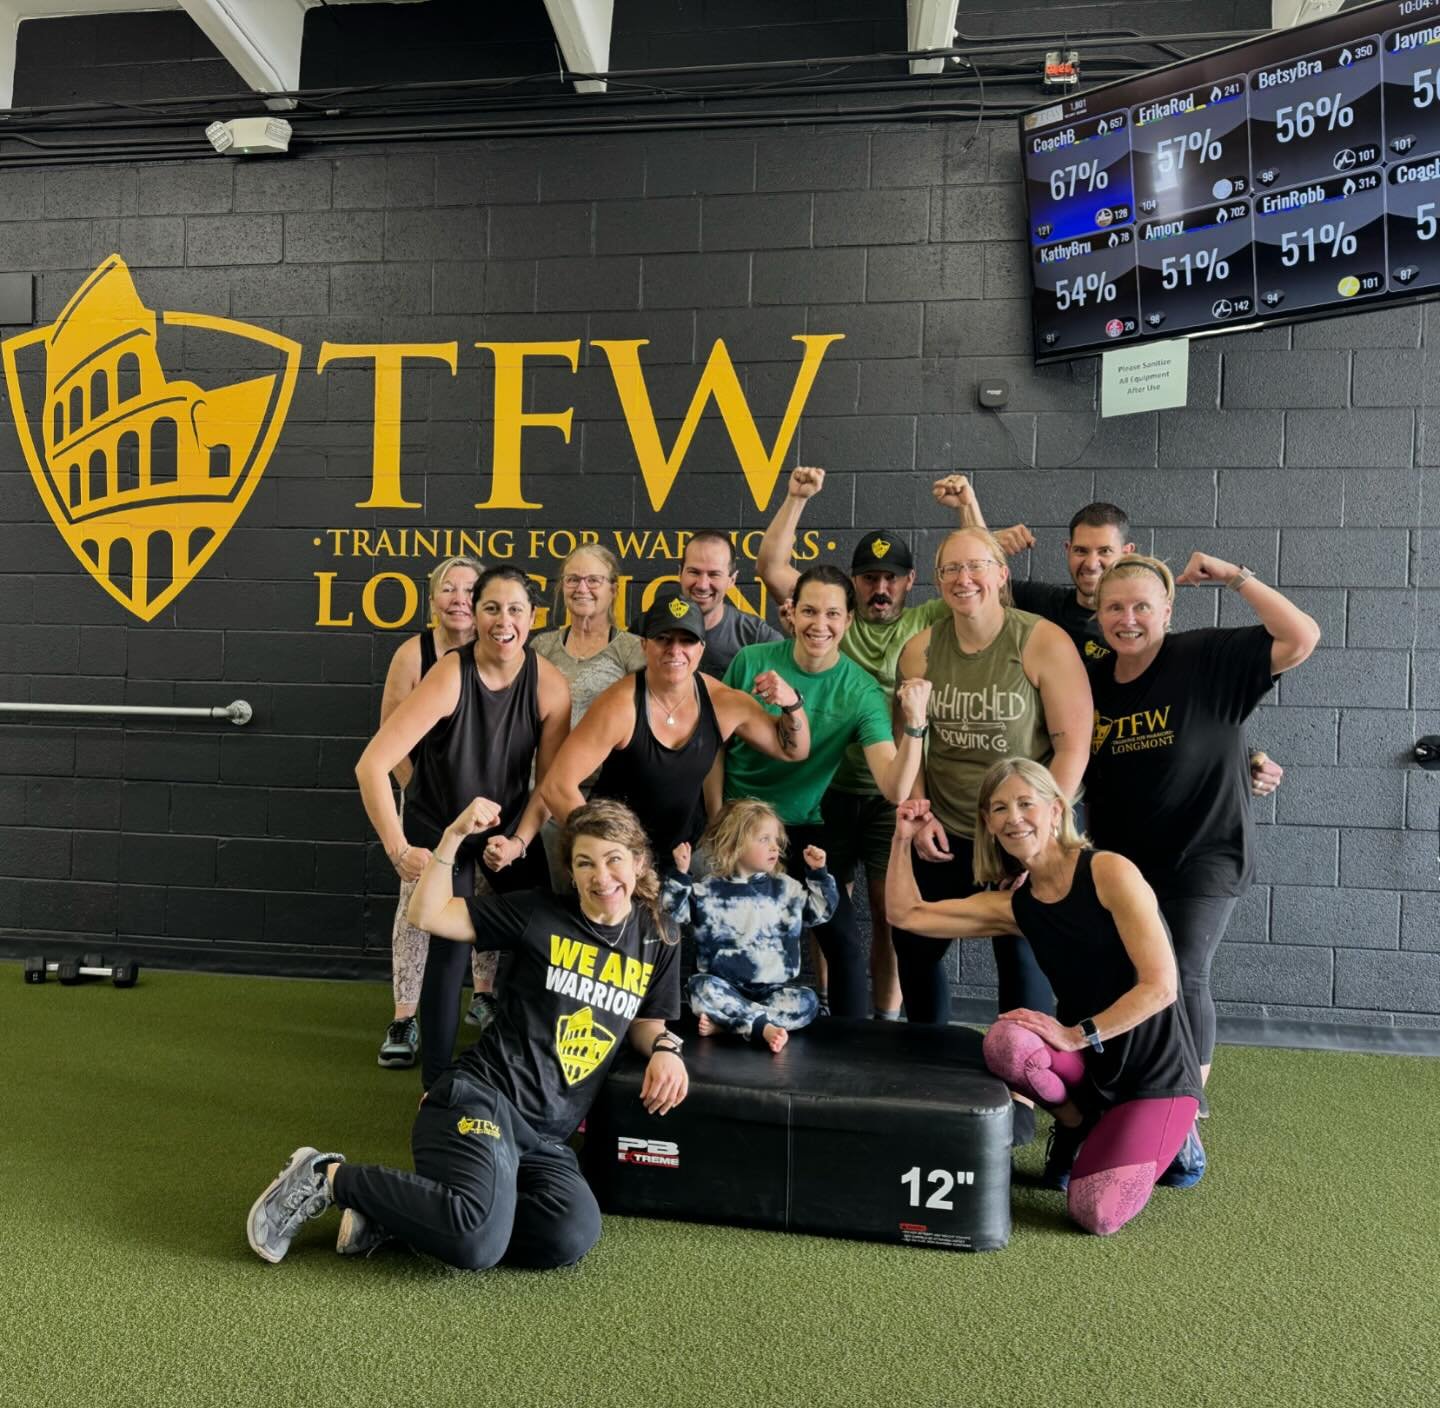 🫵🏼 Ready to get in the best shape of your life? 

&hellip;Once you&rsquo;ve walked in you&rsquo;ve already overcome the biggest obstacle: your fear. 👊🏽🙌🏼👏🏽

Sign up for your free trial training session today at our website:

www.tfwlongmontfi